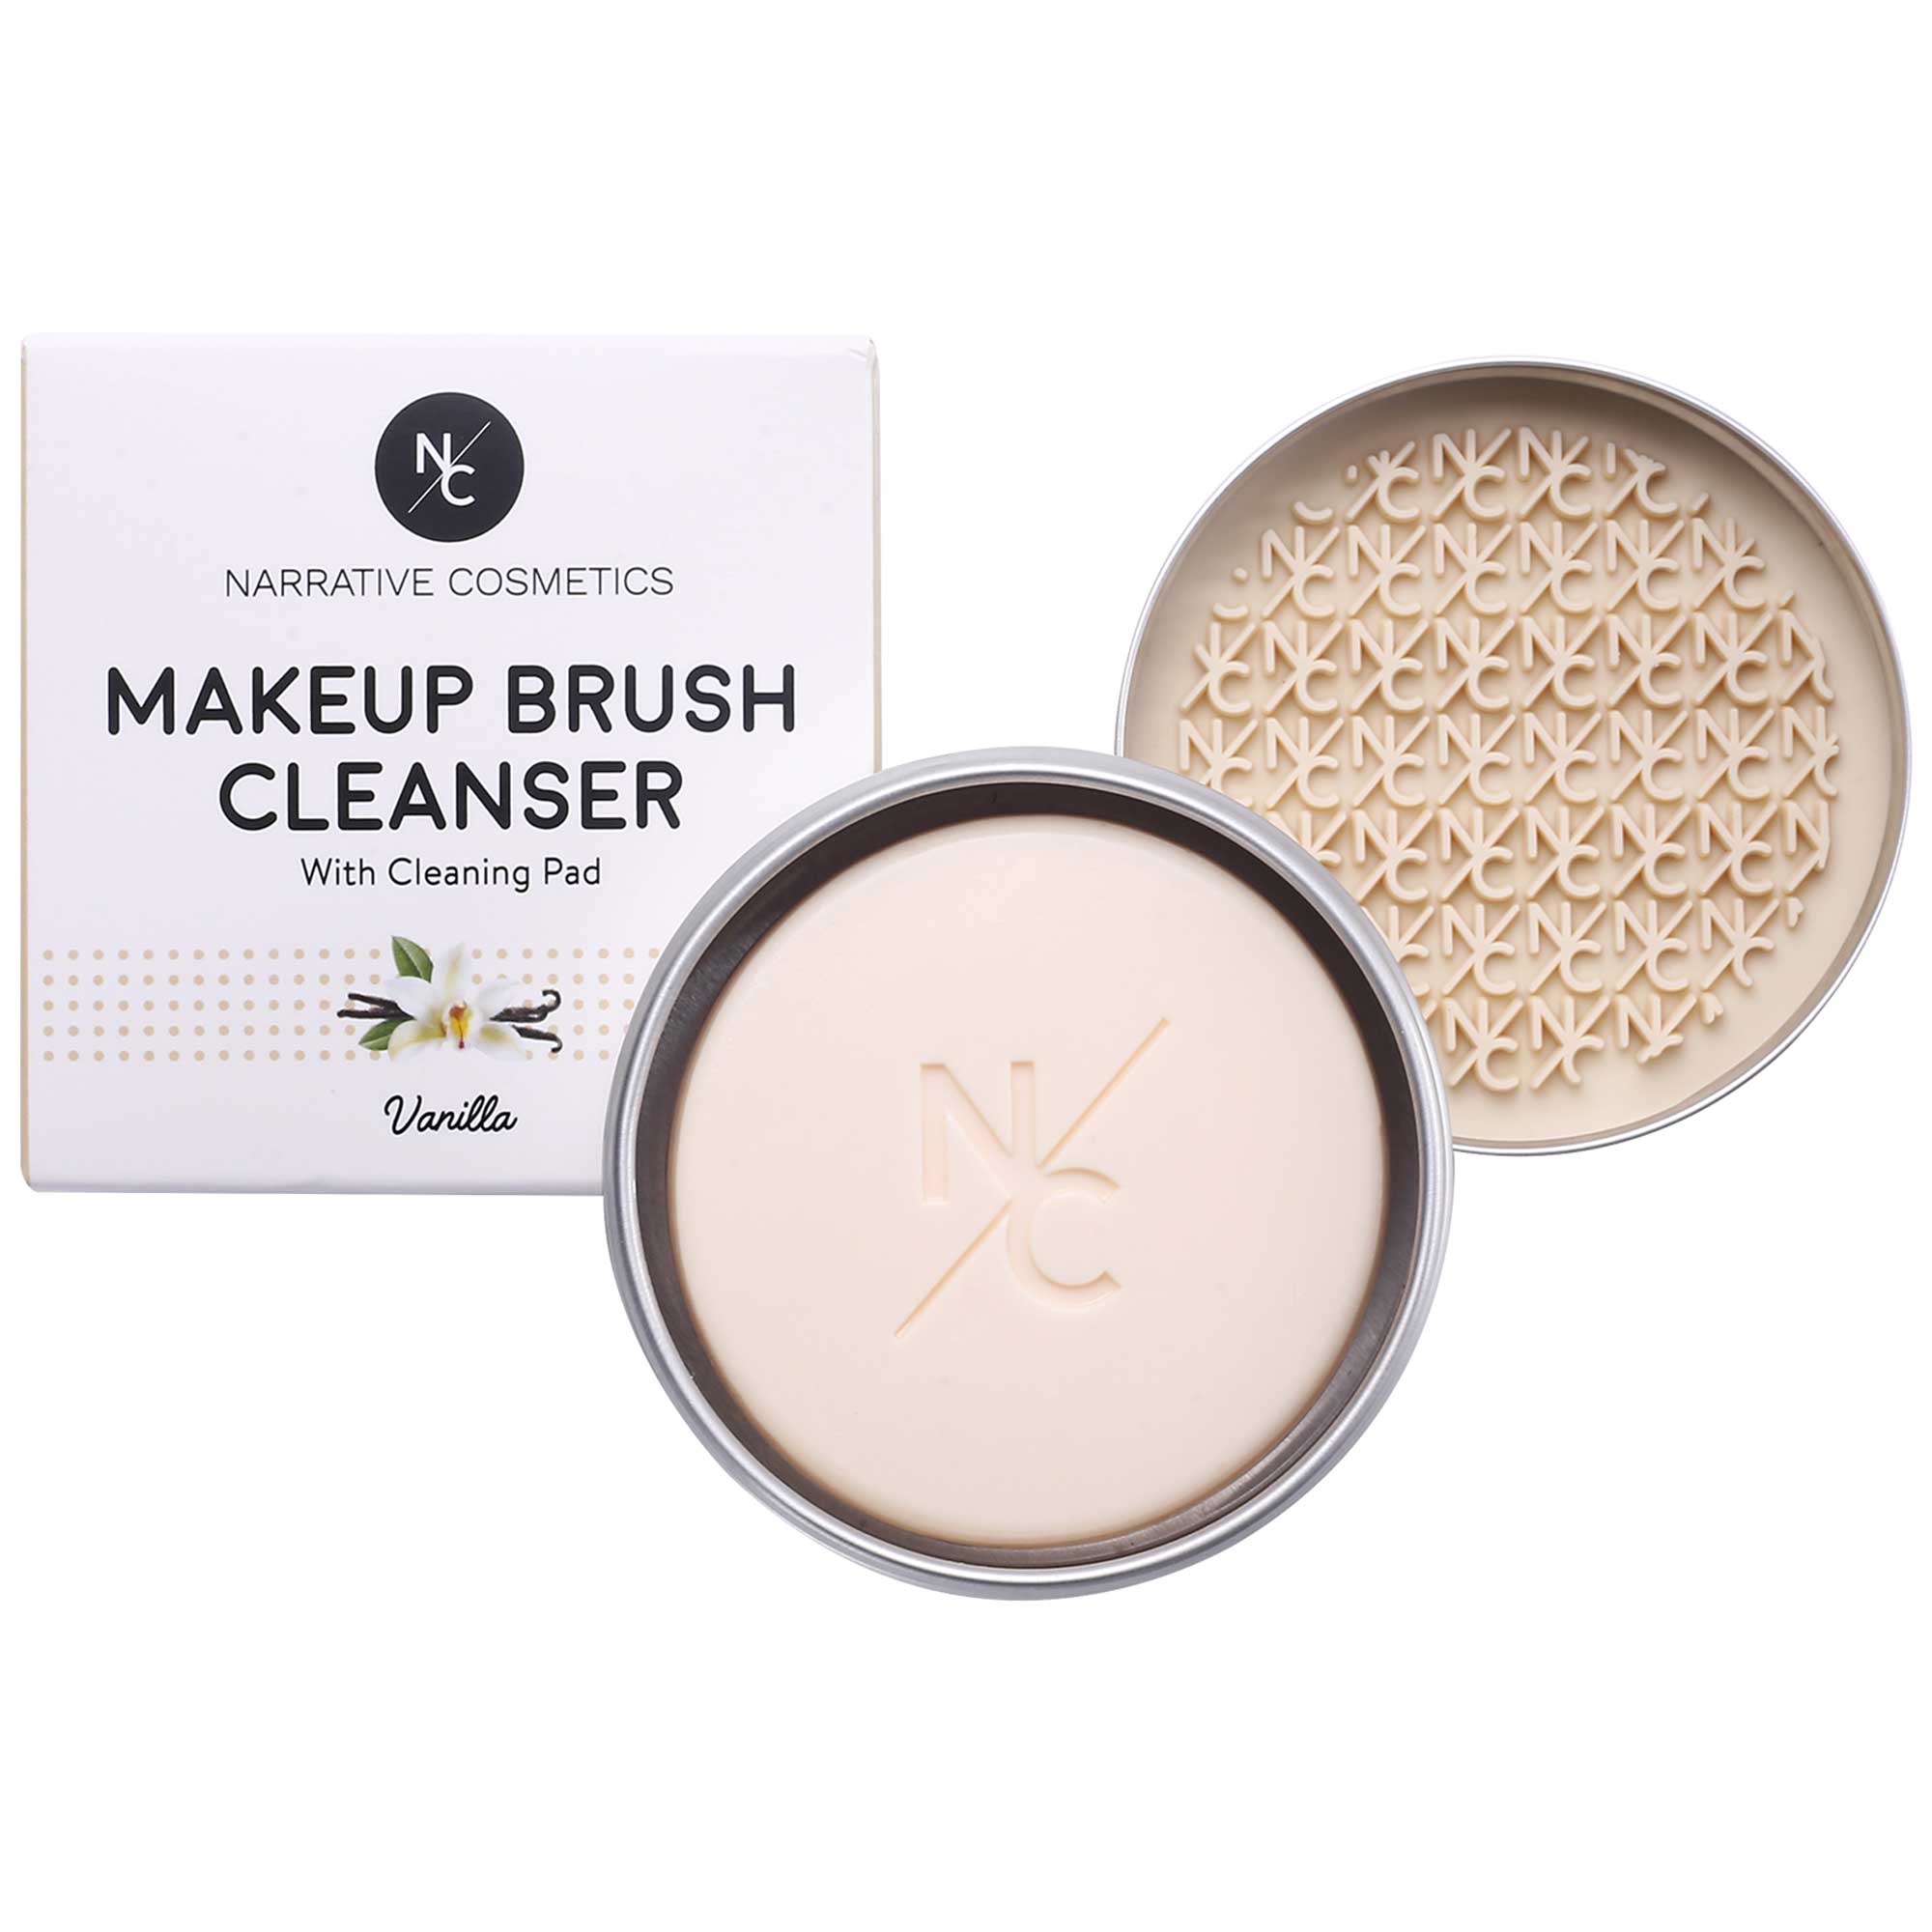 Narrative Cosmetics Solid Makeup Brush Cleanser Soap for Cosmetic Brushes with Silicone Cleaning Pad - Vanilla Fragrance